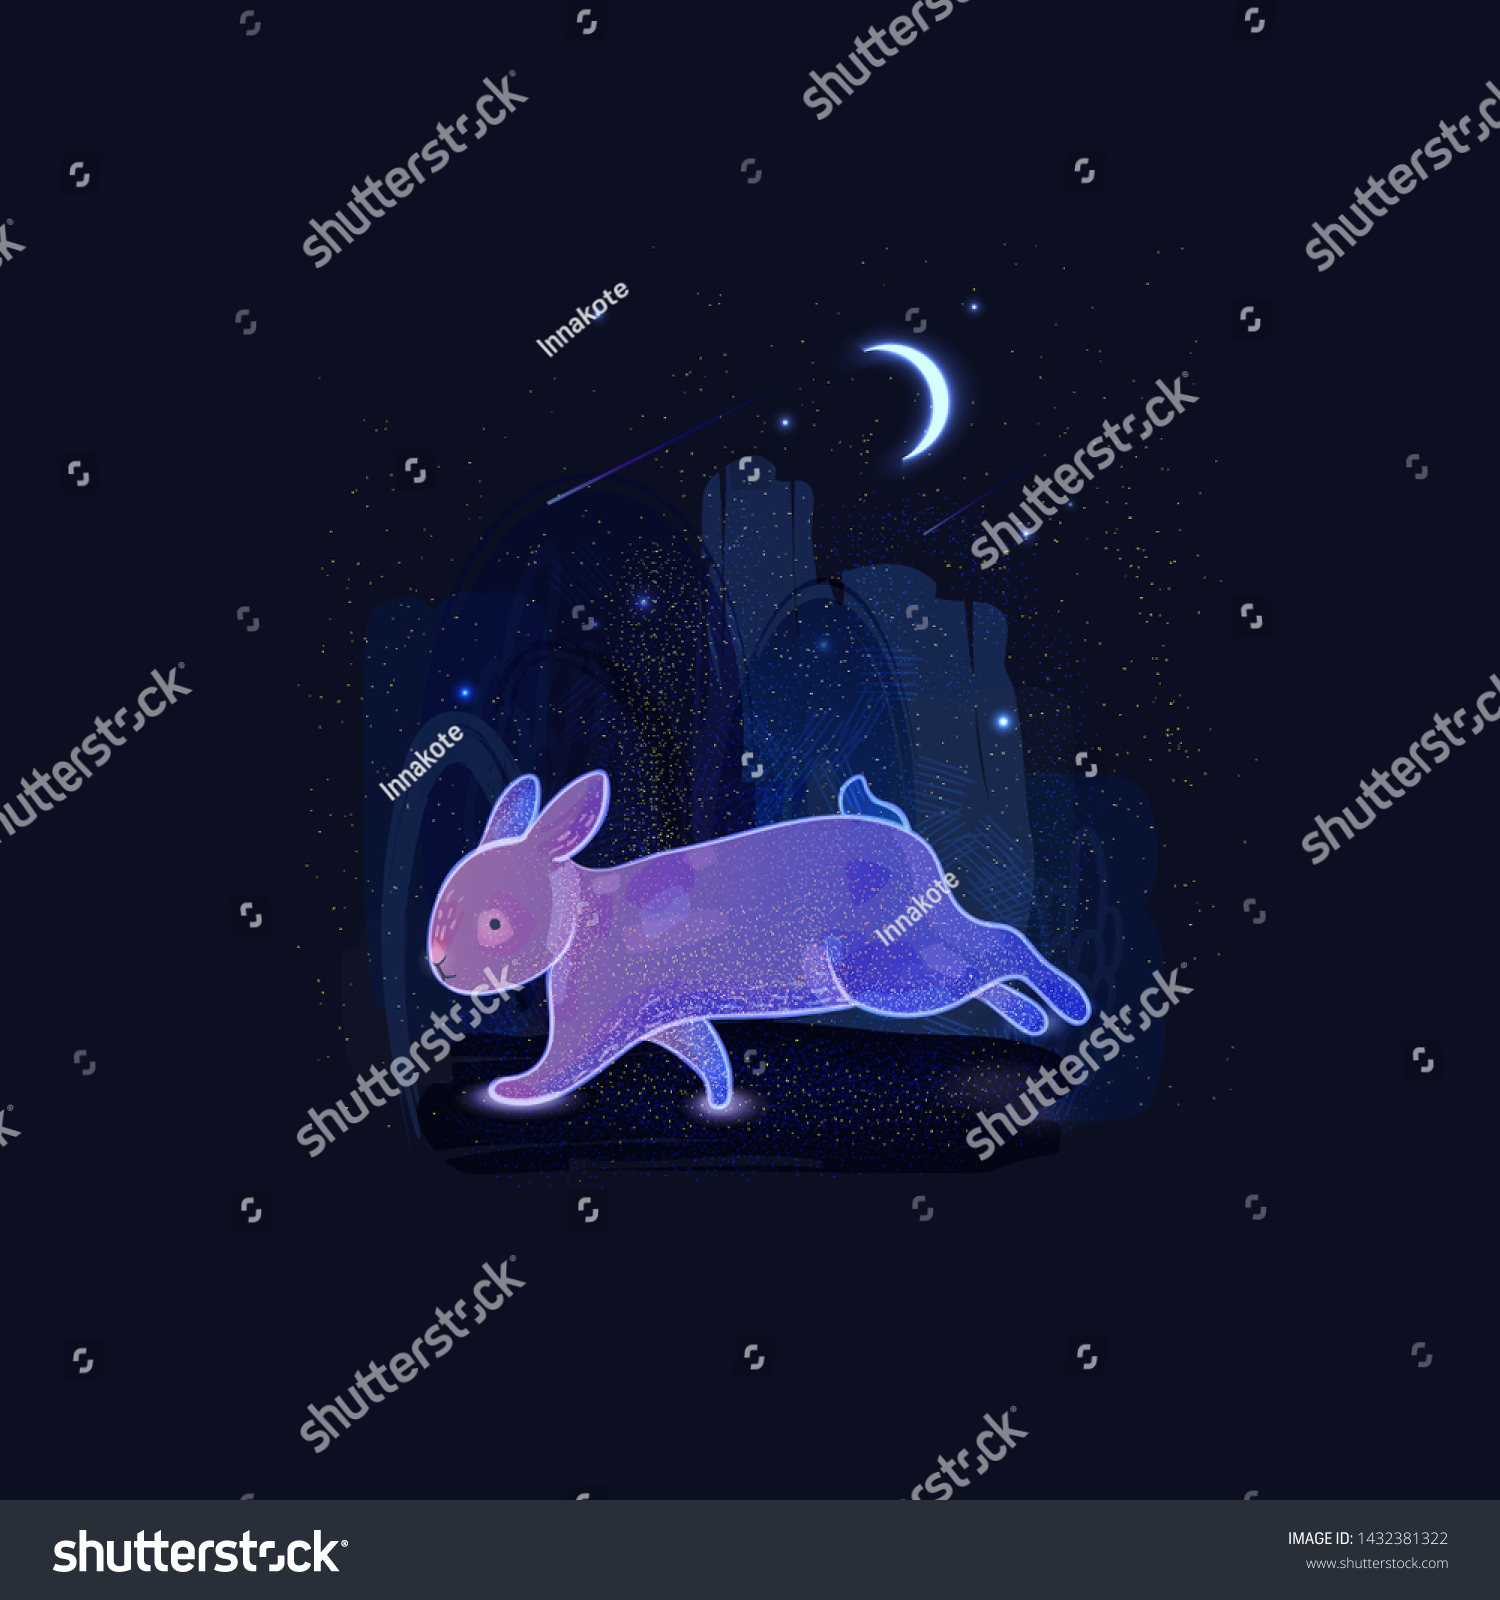 SVG of A transparent blue rabbit runs through the night fairy-tale forest, a bright crescent shines in the starry sky. Childlike illustration of a forest ghost against a stargazing background. svg